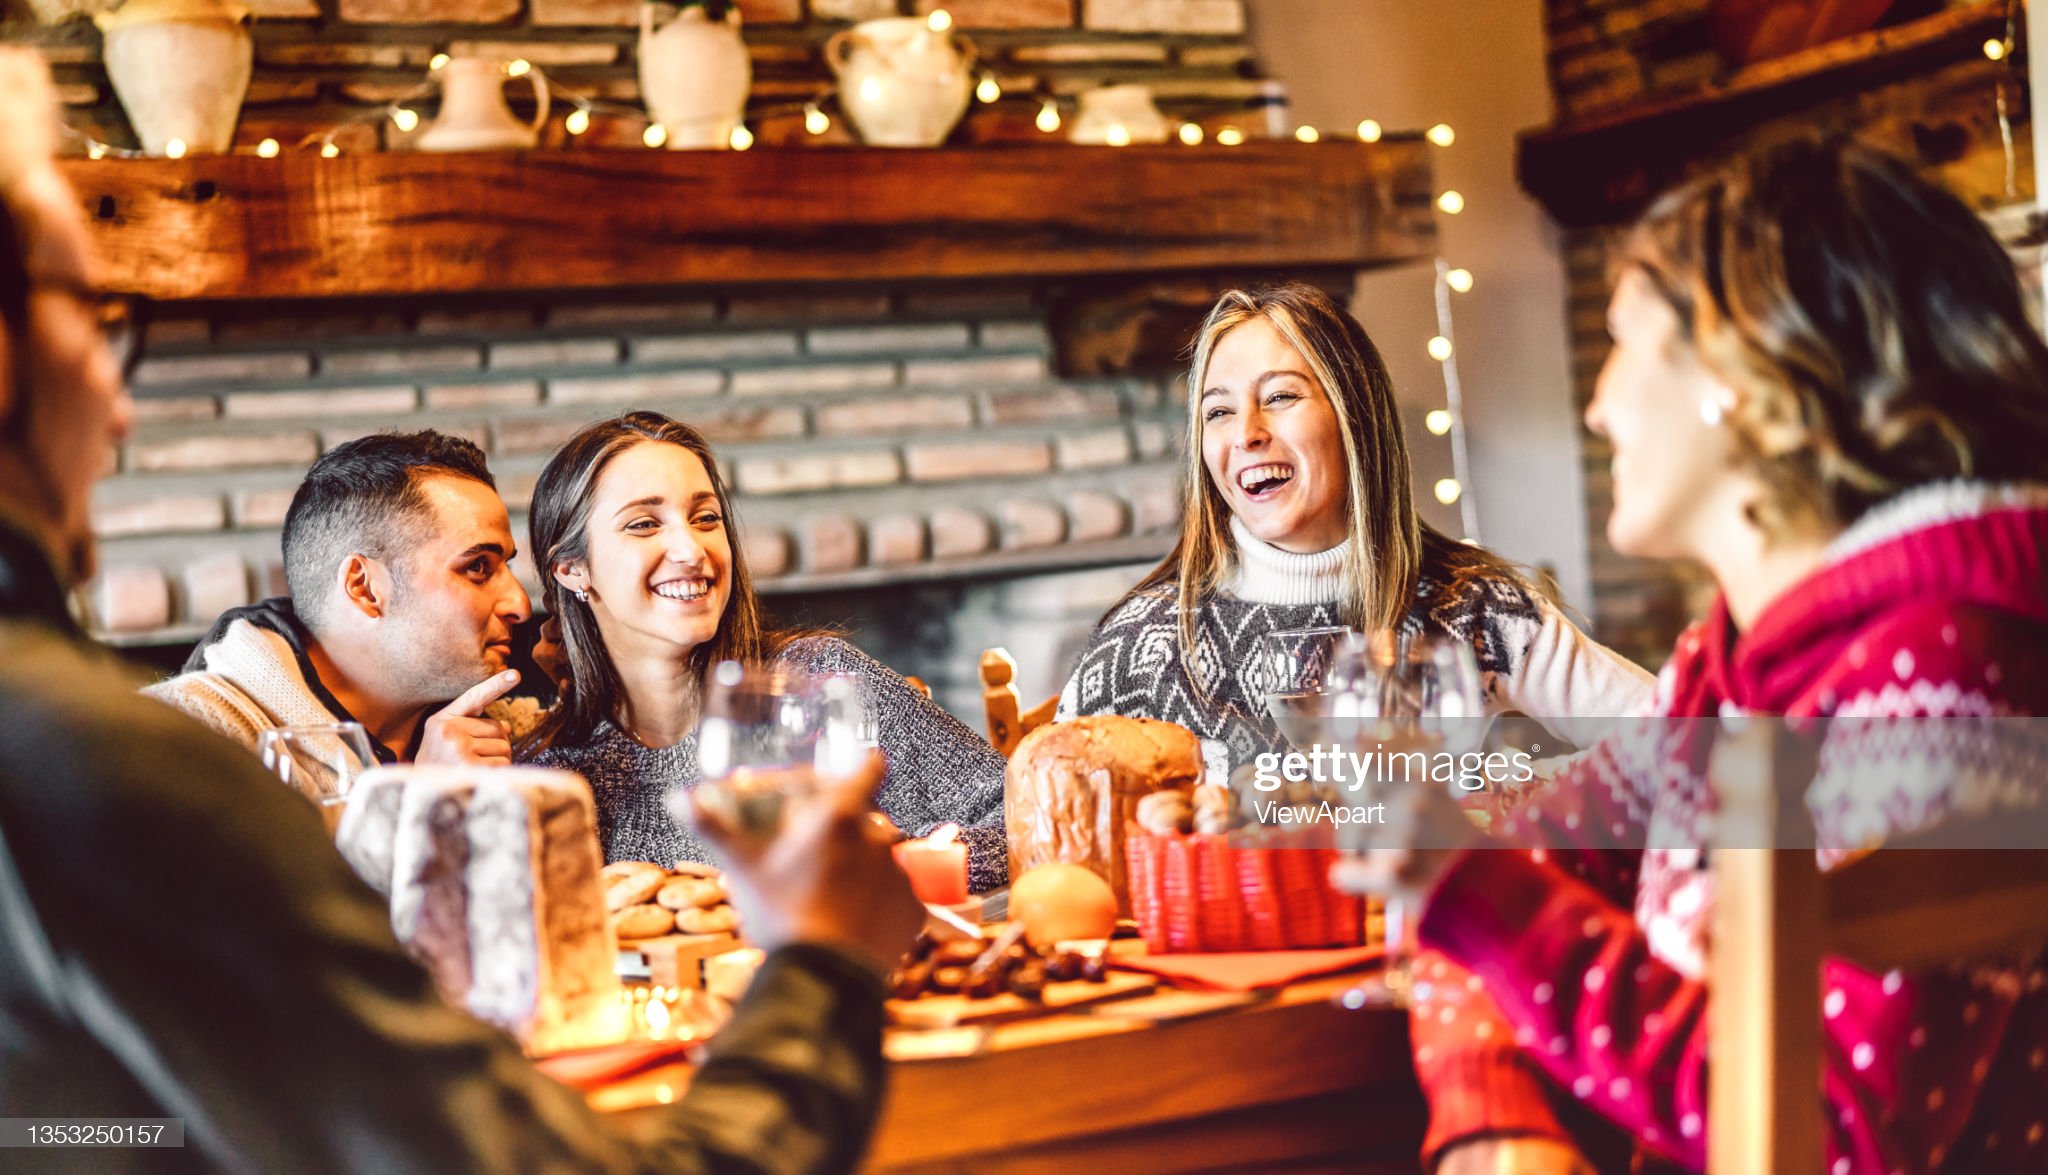 Millenial people tasting Christmas sweets at home supper party - New year's eve and winter holiday concept with young friends having fun eating together at evening - Bulb string lights warm filter